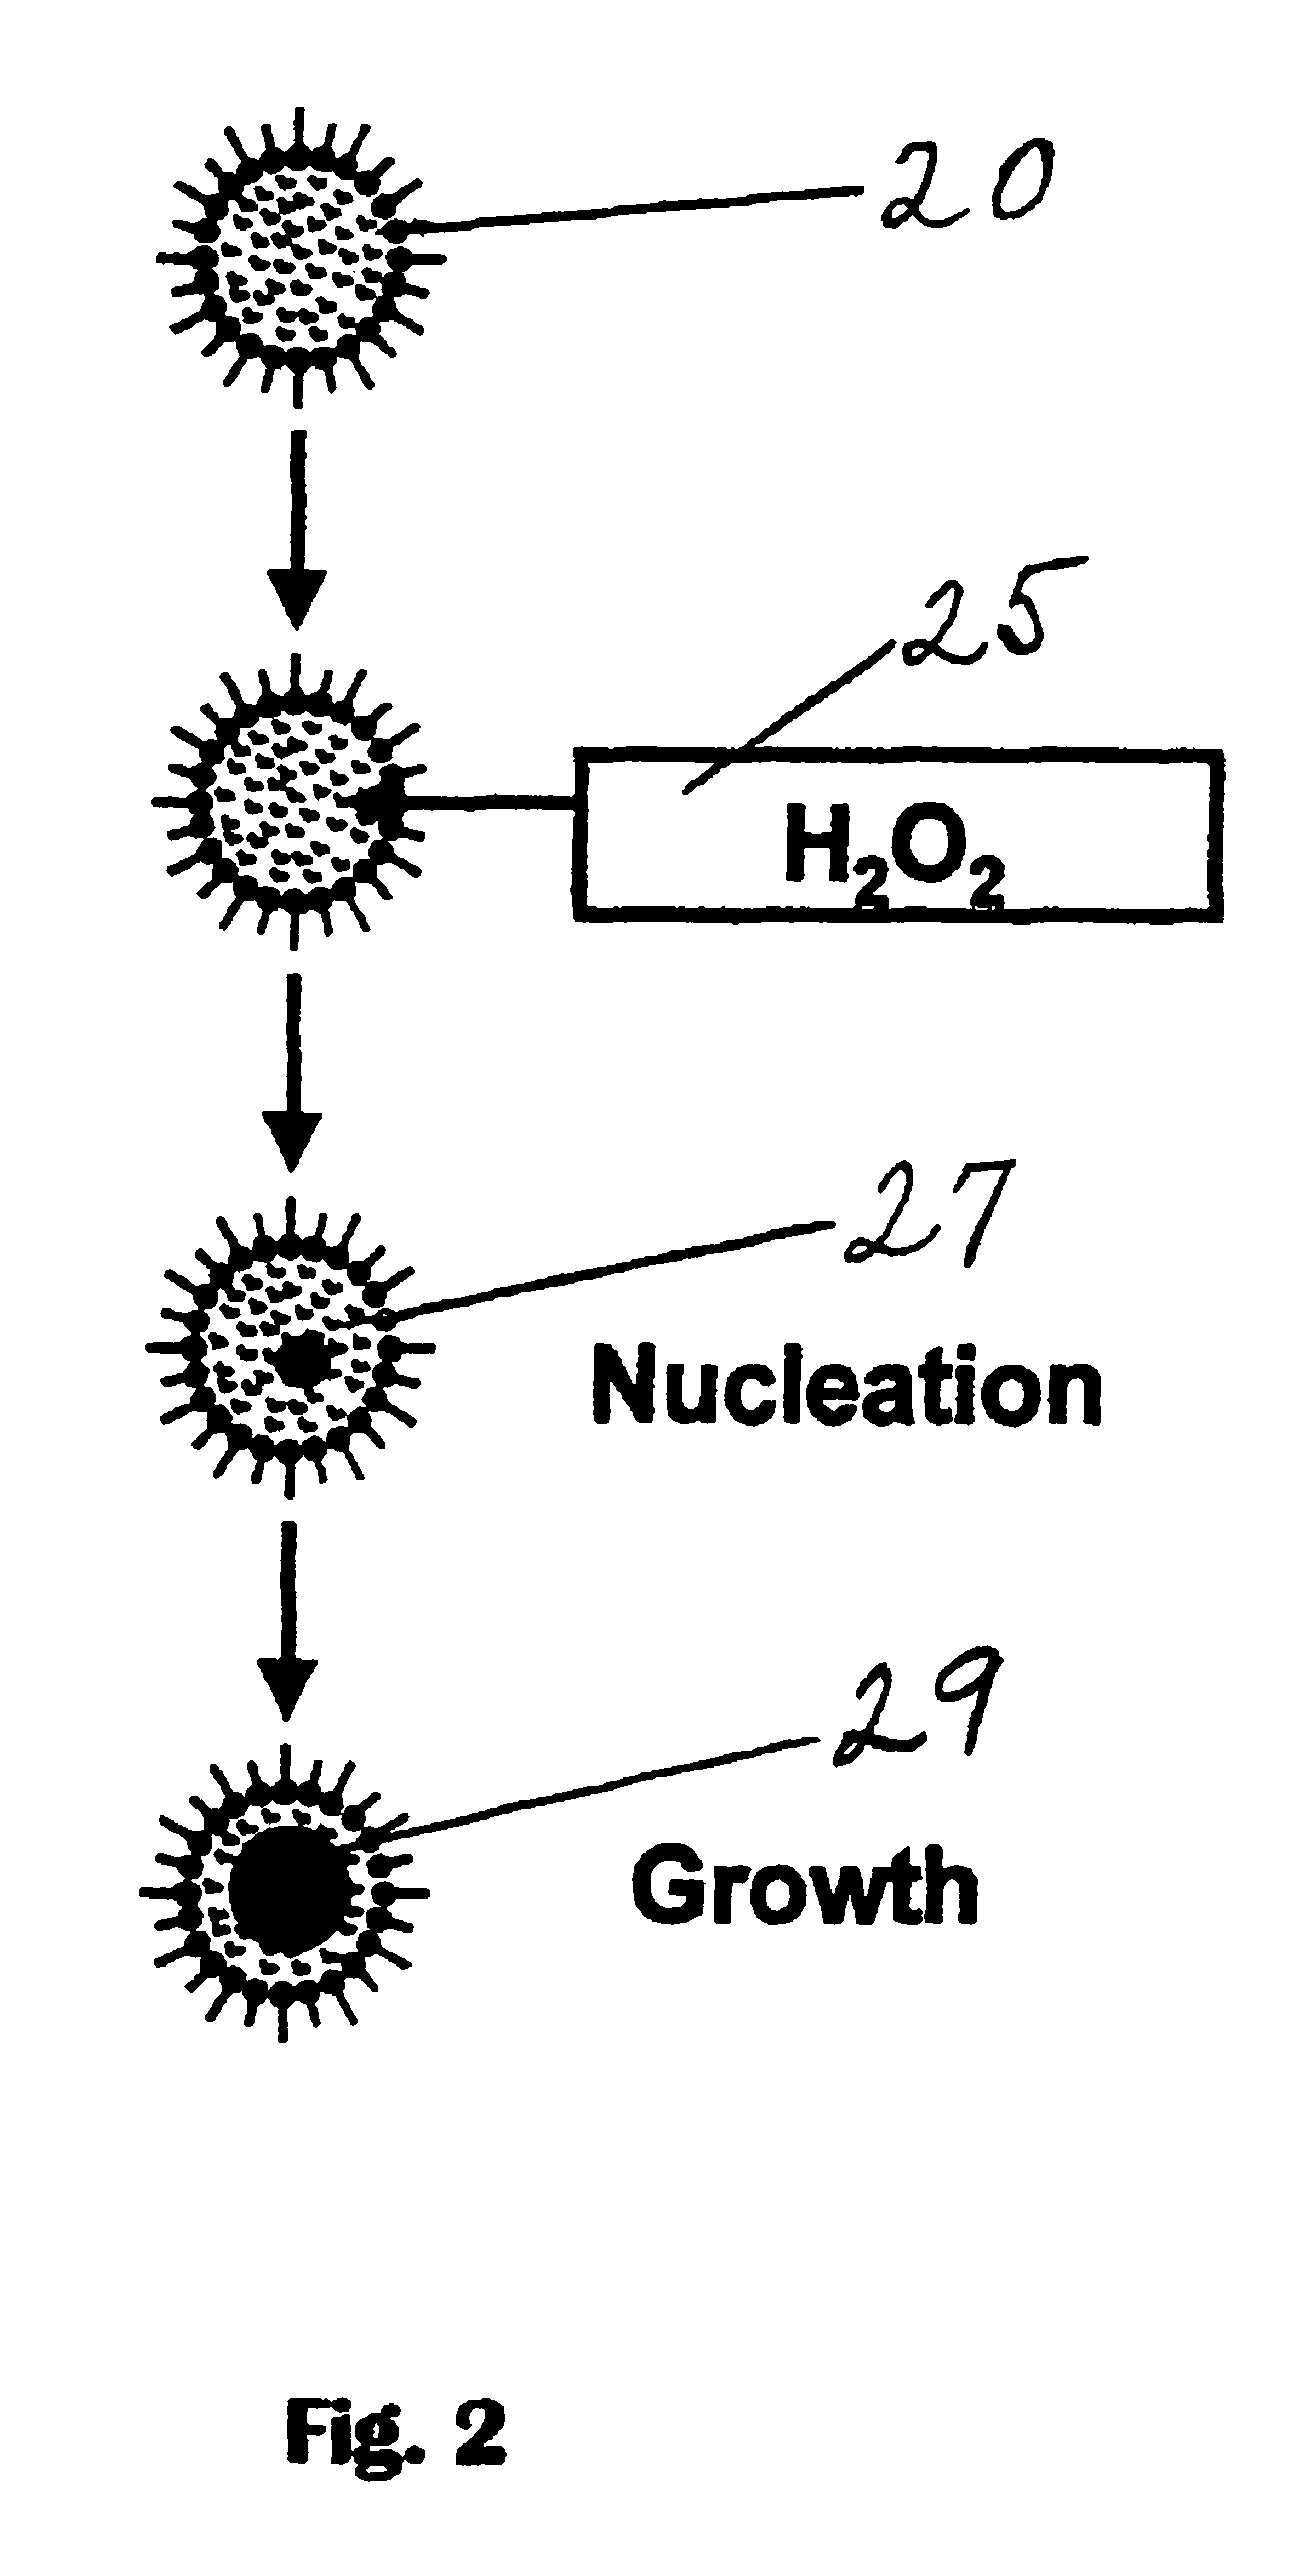 Nanoparticles for soot reduction